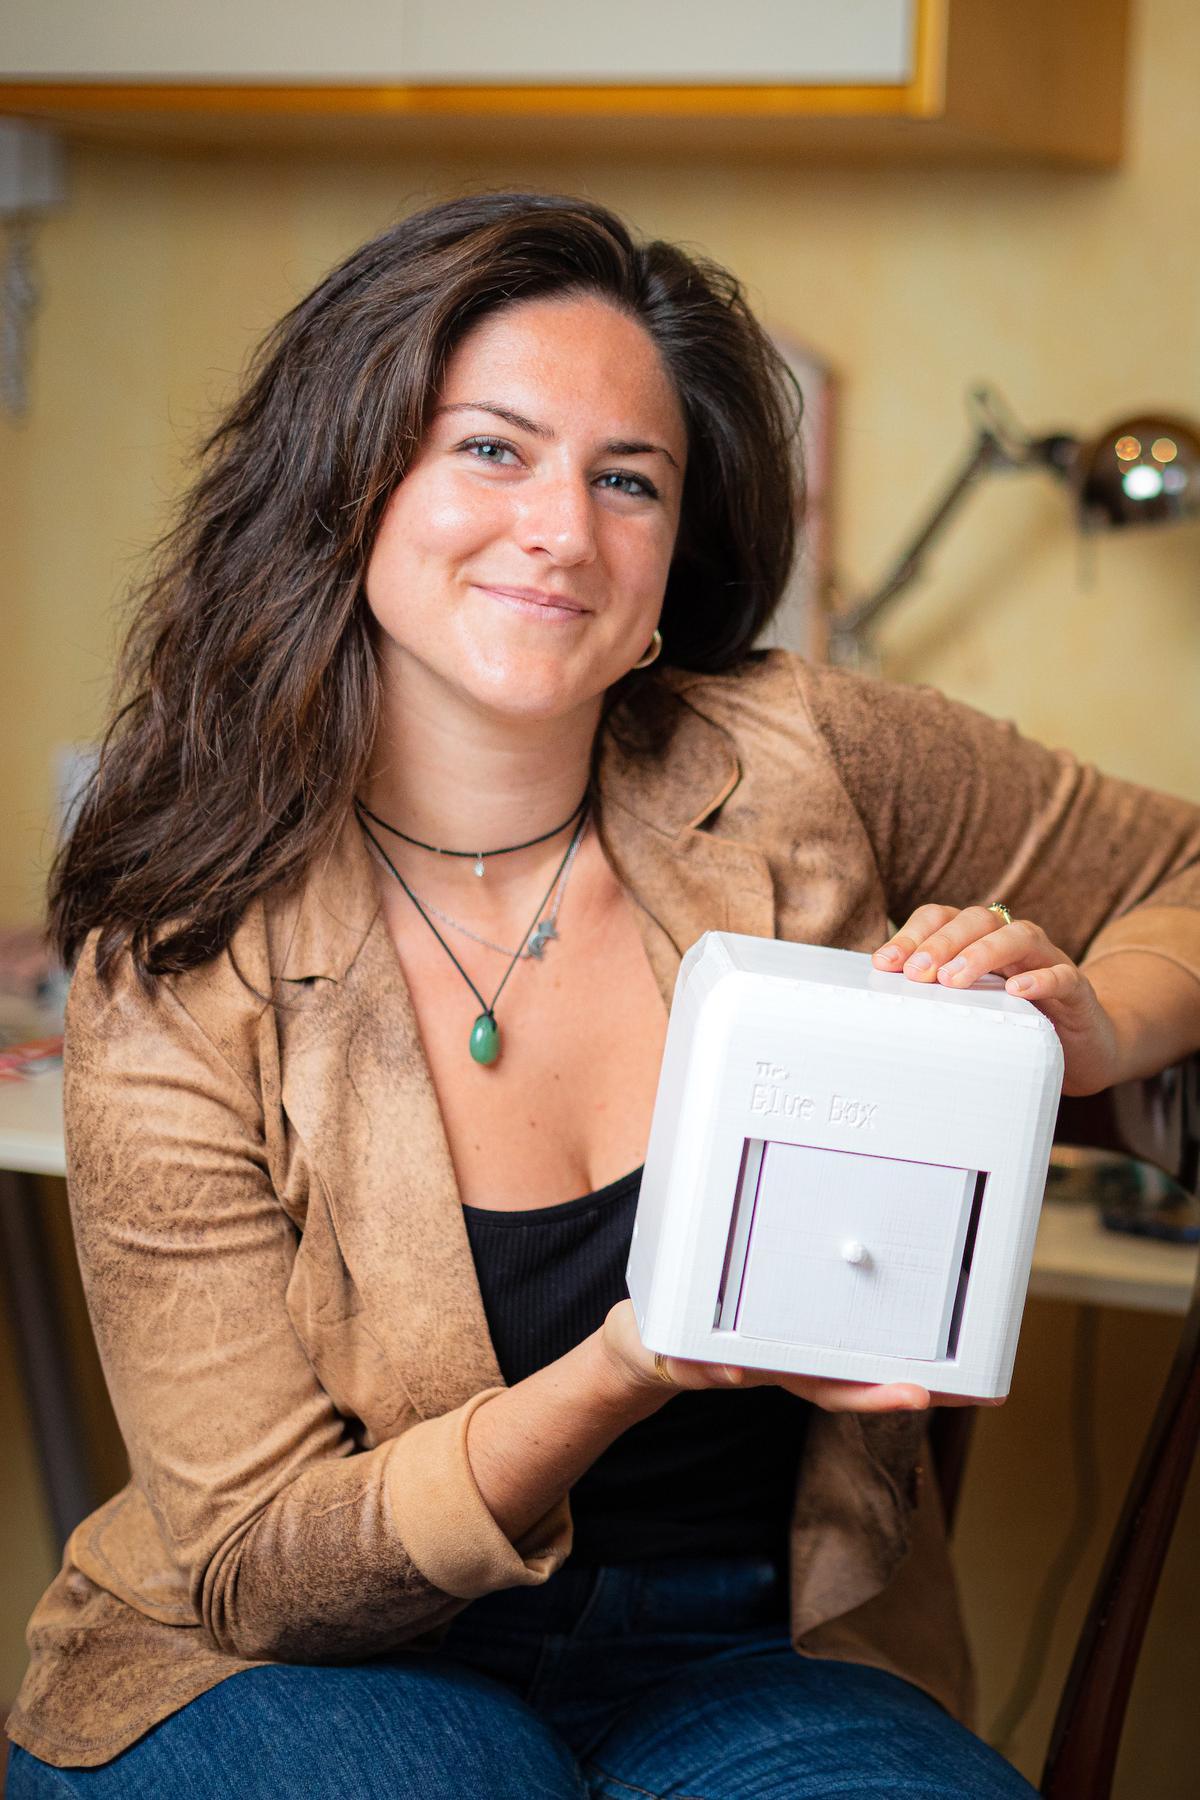 Judit Giró Benet, 23, with her invention, The Blue Box. (Courtesy of <a href="https://www.jamesdysonaward.org/en-US/">James Dyson Award</a>)